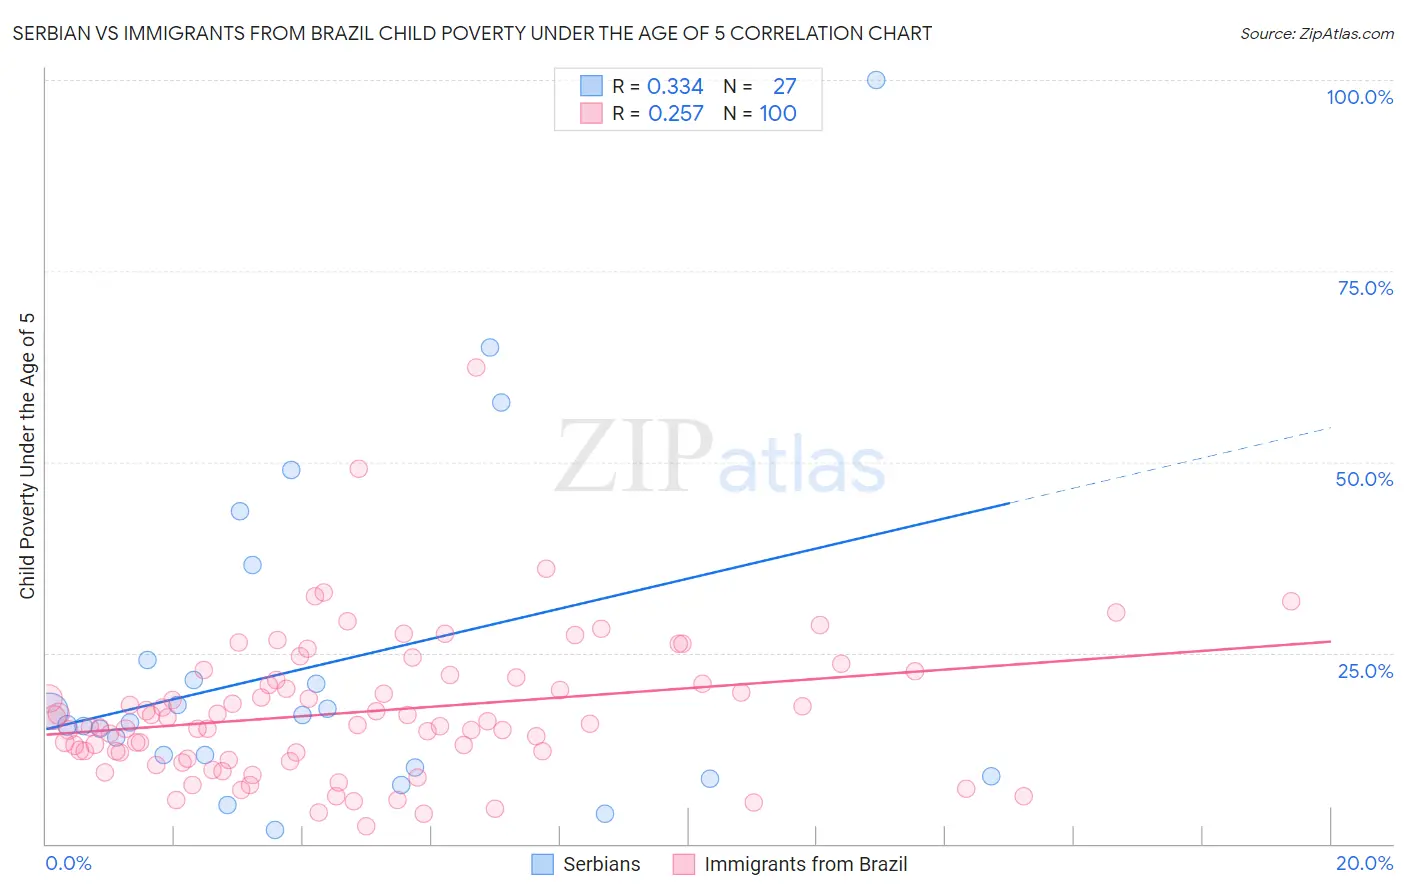 Serbian vs Immigrants from Brazil Child Poverty Under the Age of 5